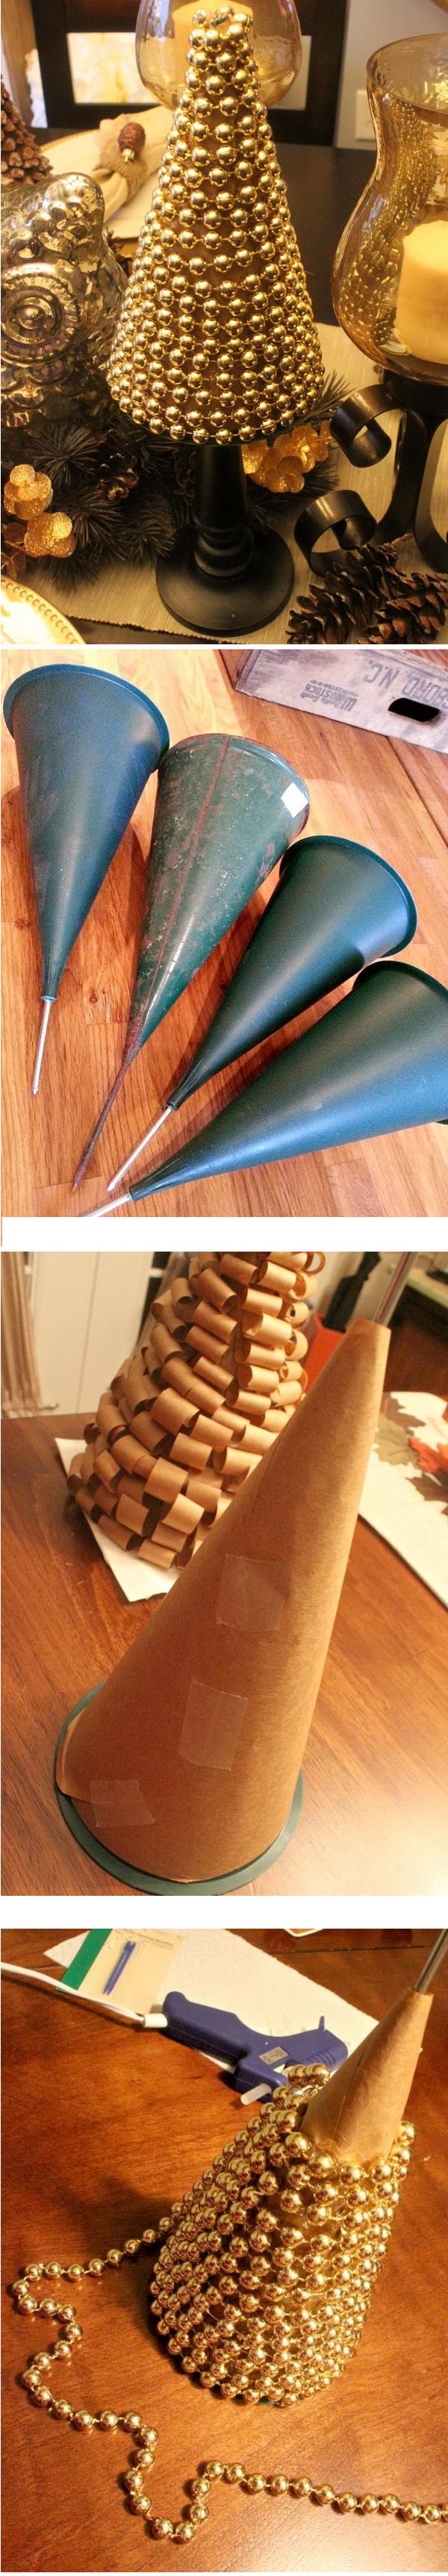 5. Cone and Beads